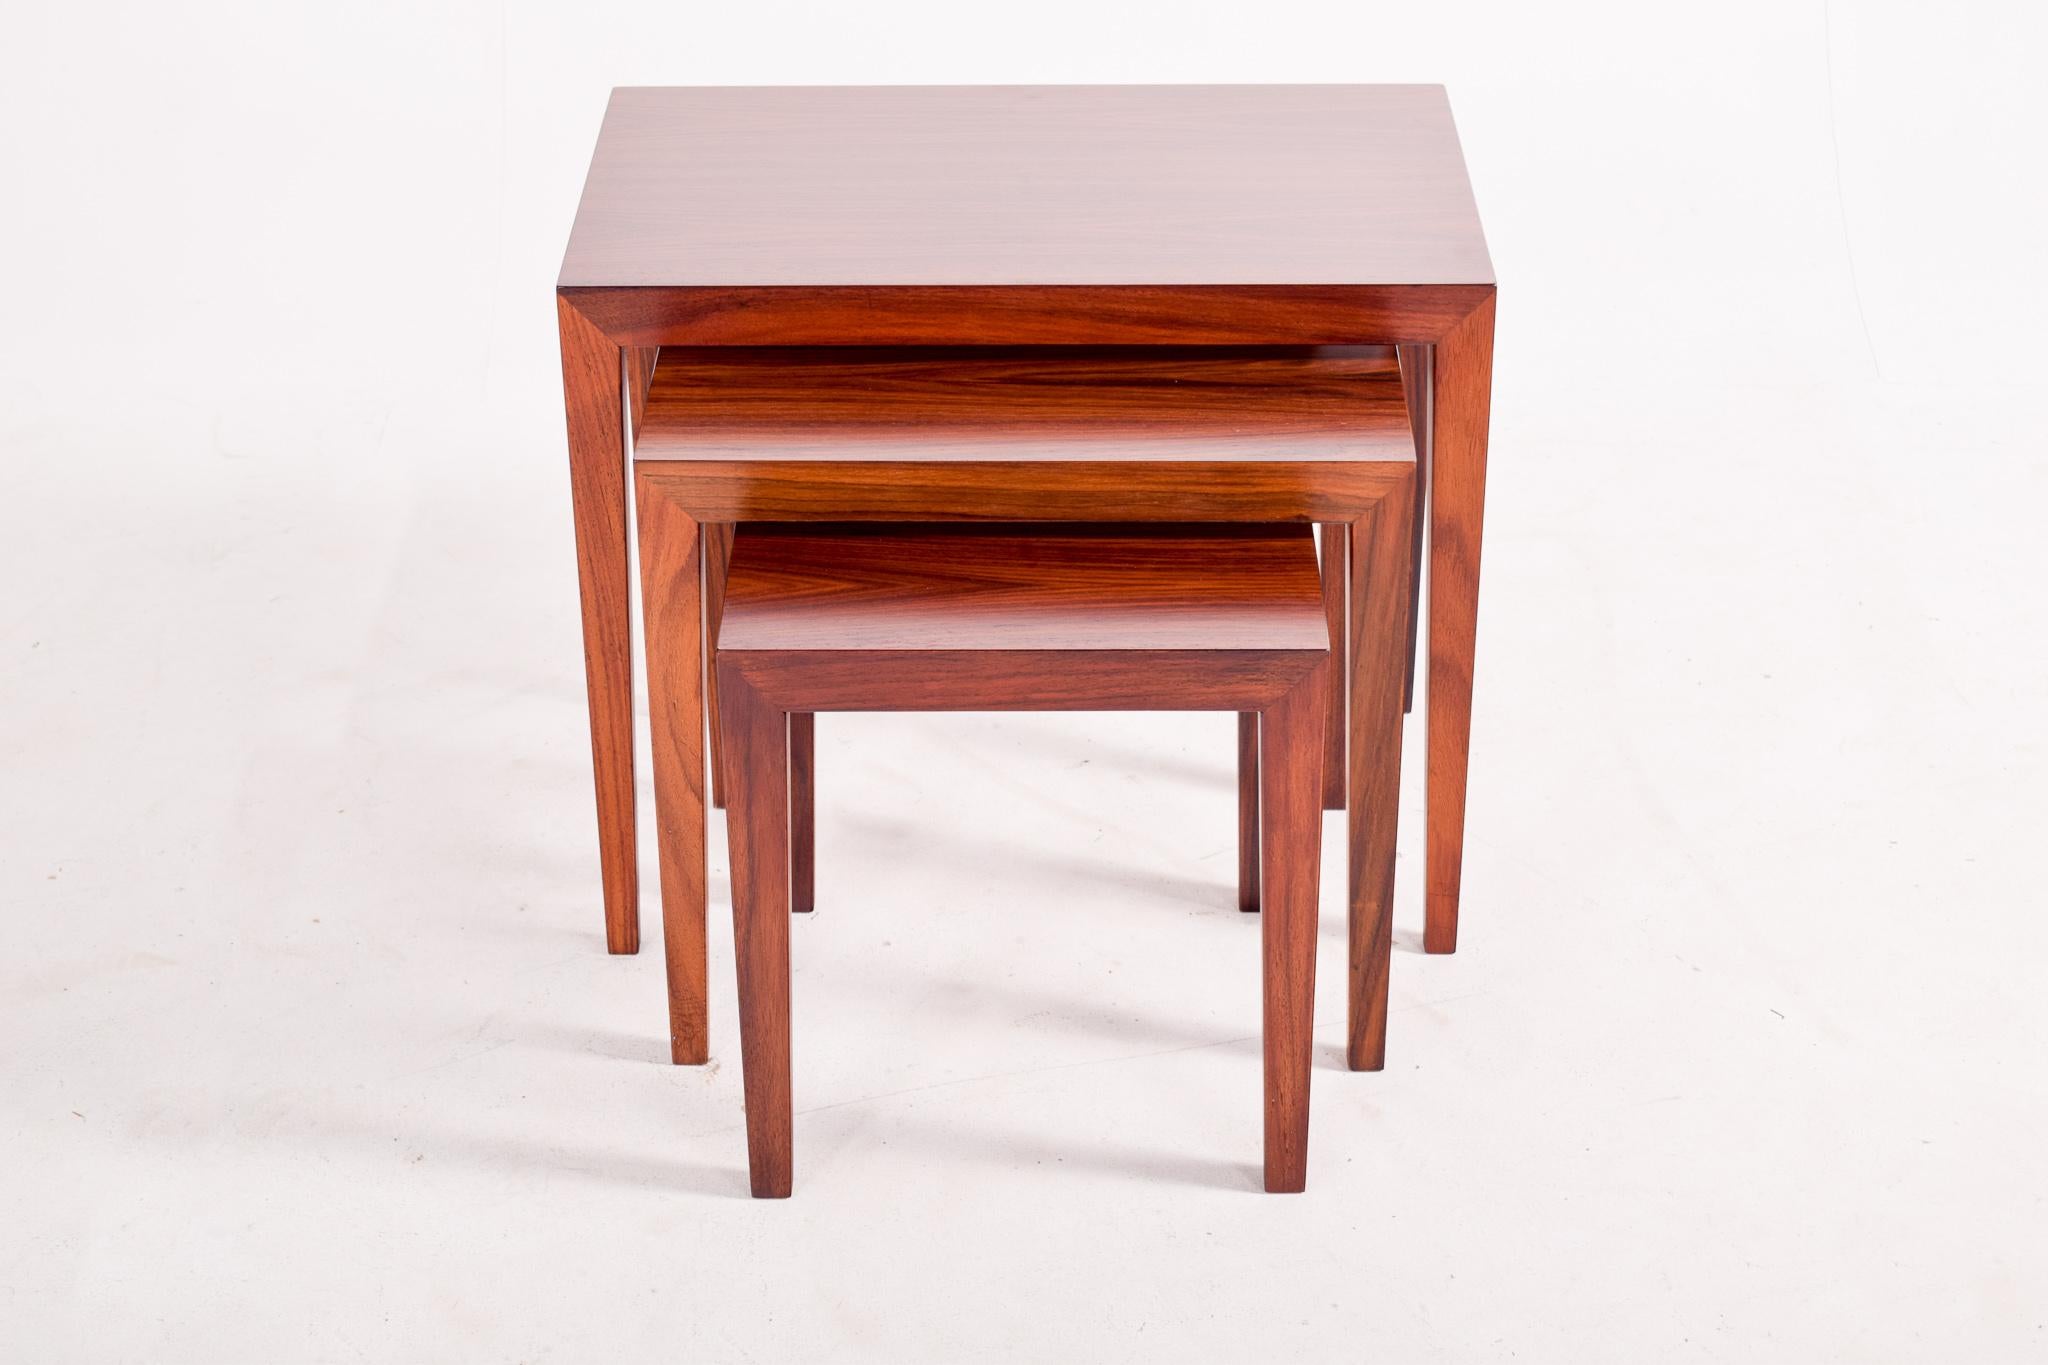 A gorgeous set of nesting tables in rosewood designed by Severin Hansen Jr. for Haslev Møbelsnedskeri. His mark on corner joinery is what makes these pieces stand out with a minimalistic design. These could be used in many different ways such as a